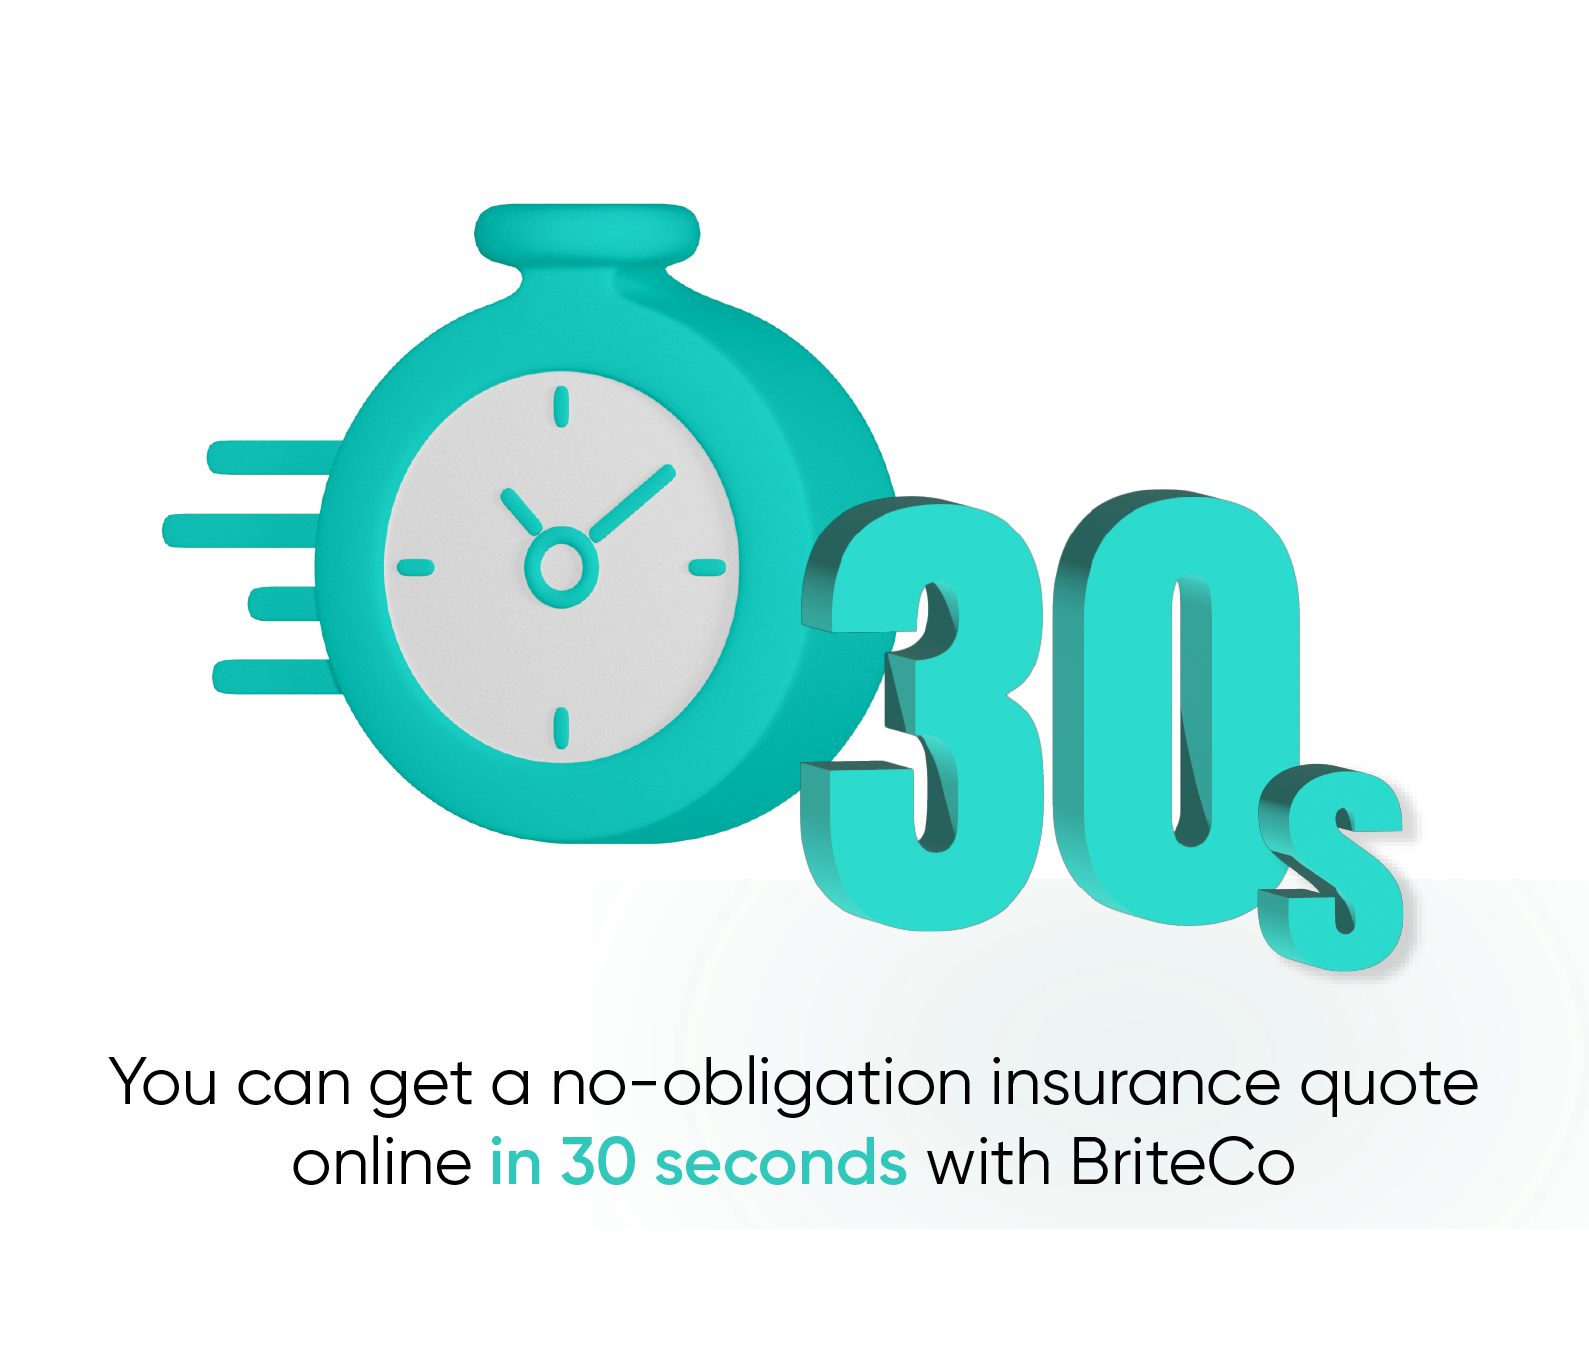 You can get a no-obligation insurance quote online in 30 seconds